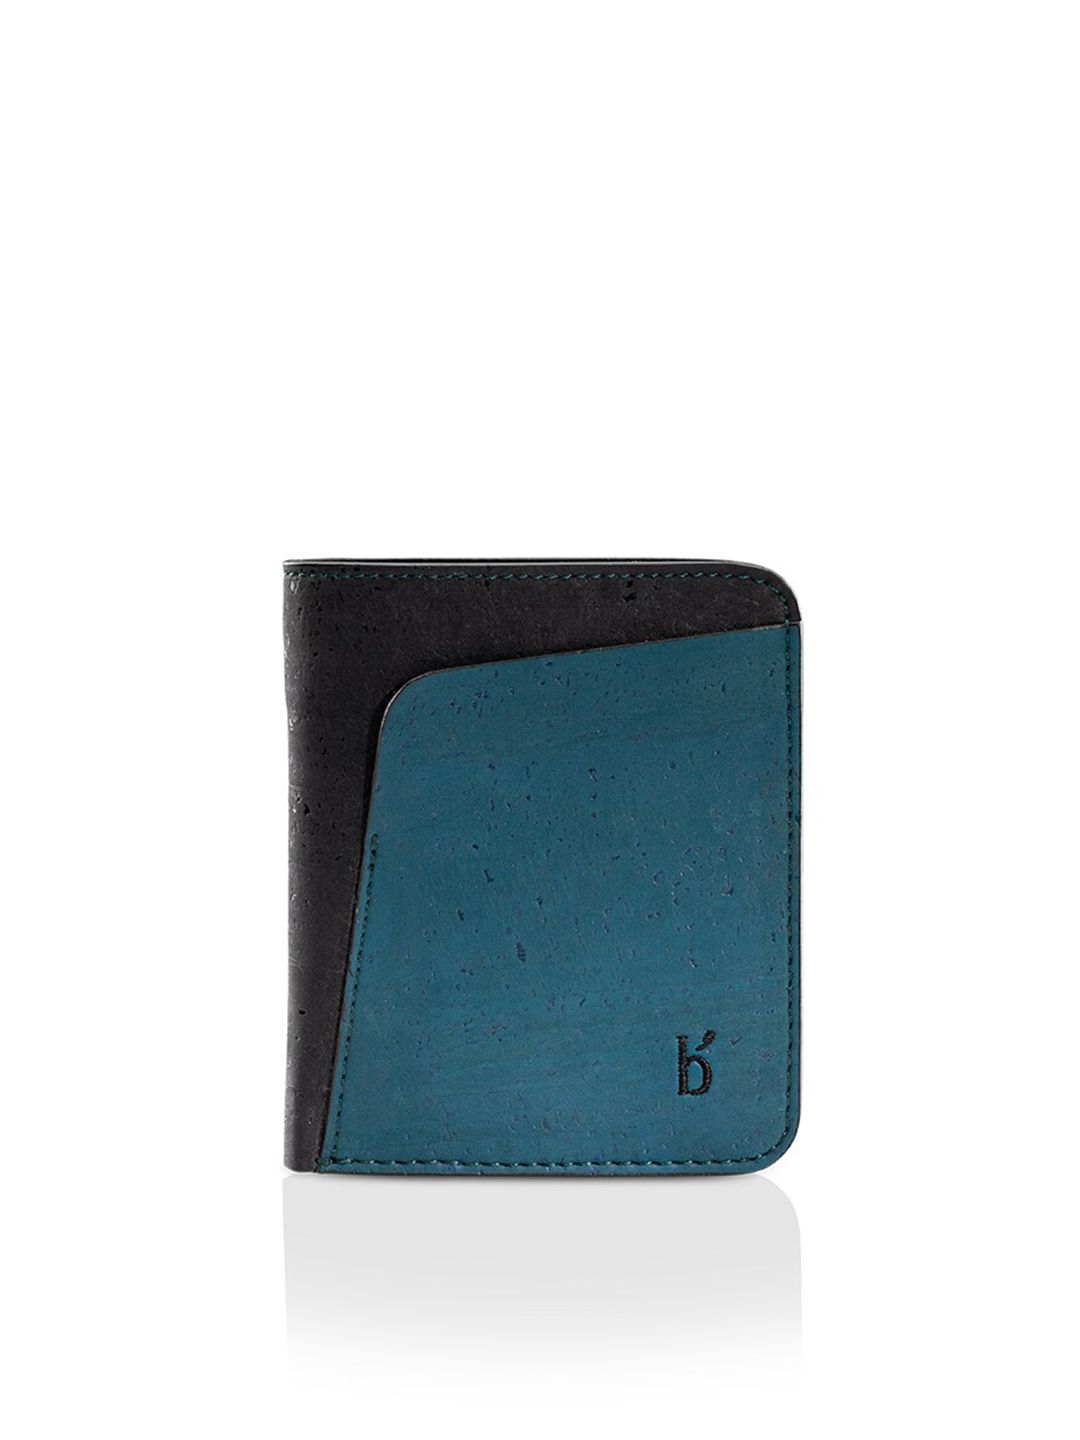 Beej Unisex Teal & Black Textured Two Fold Wallet Price in India